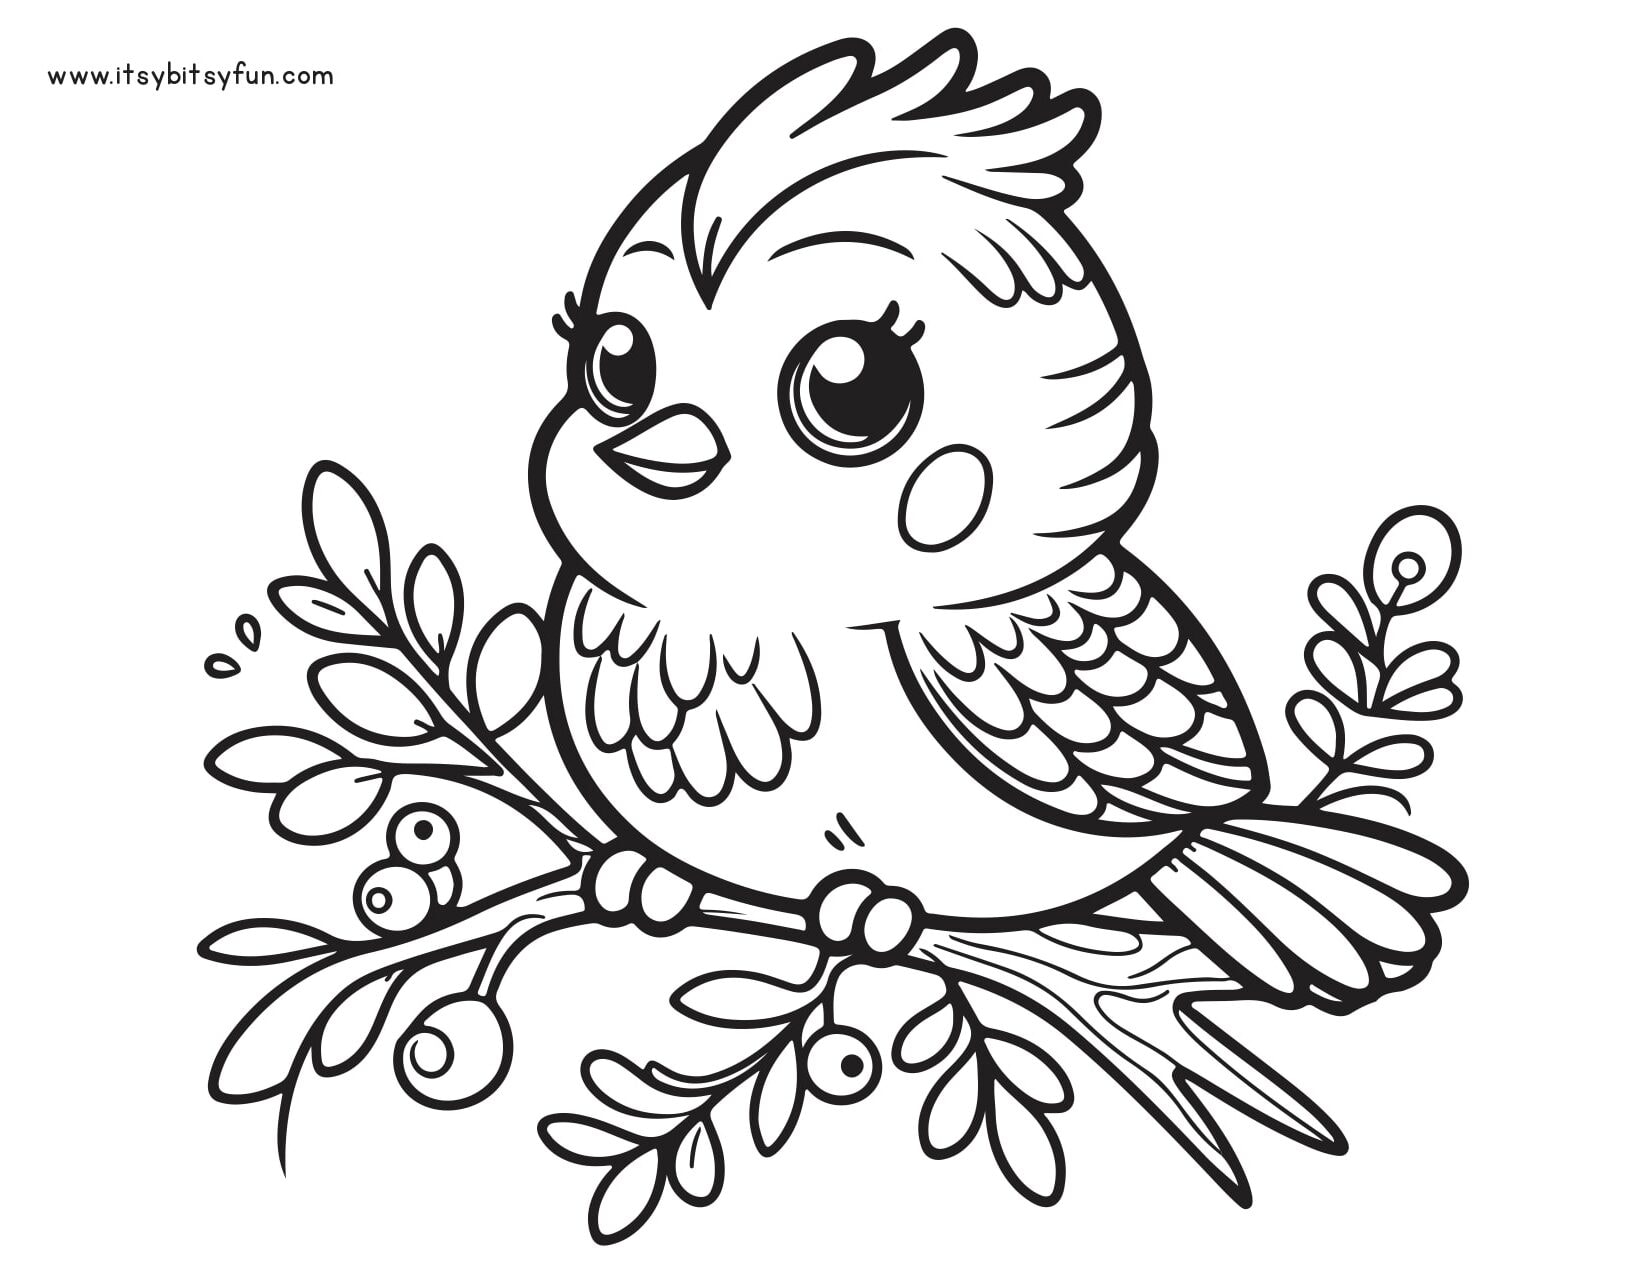 Bird image to color.